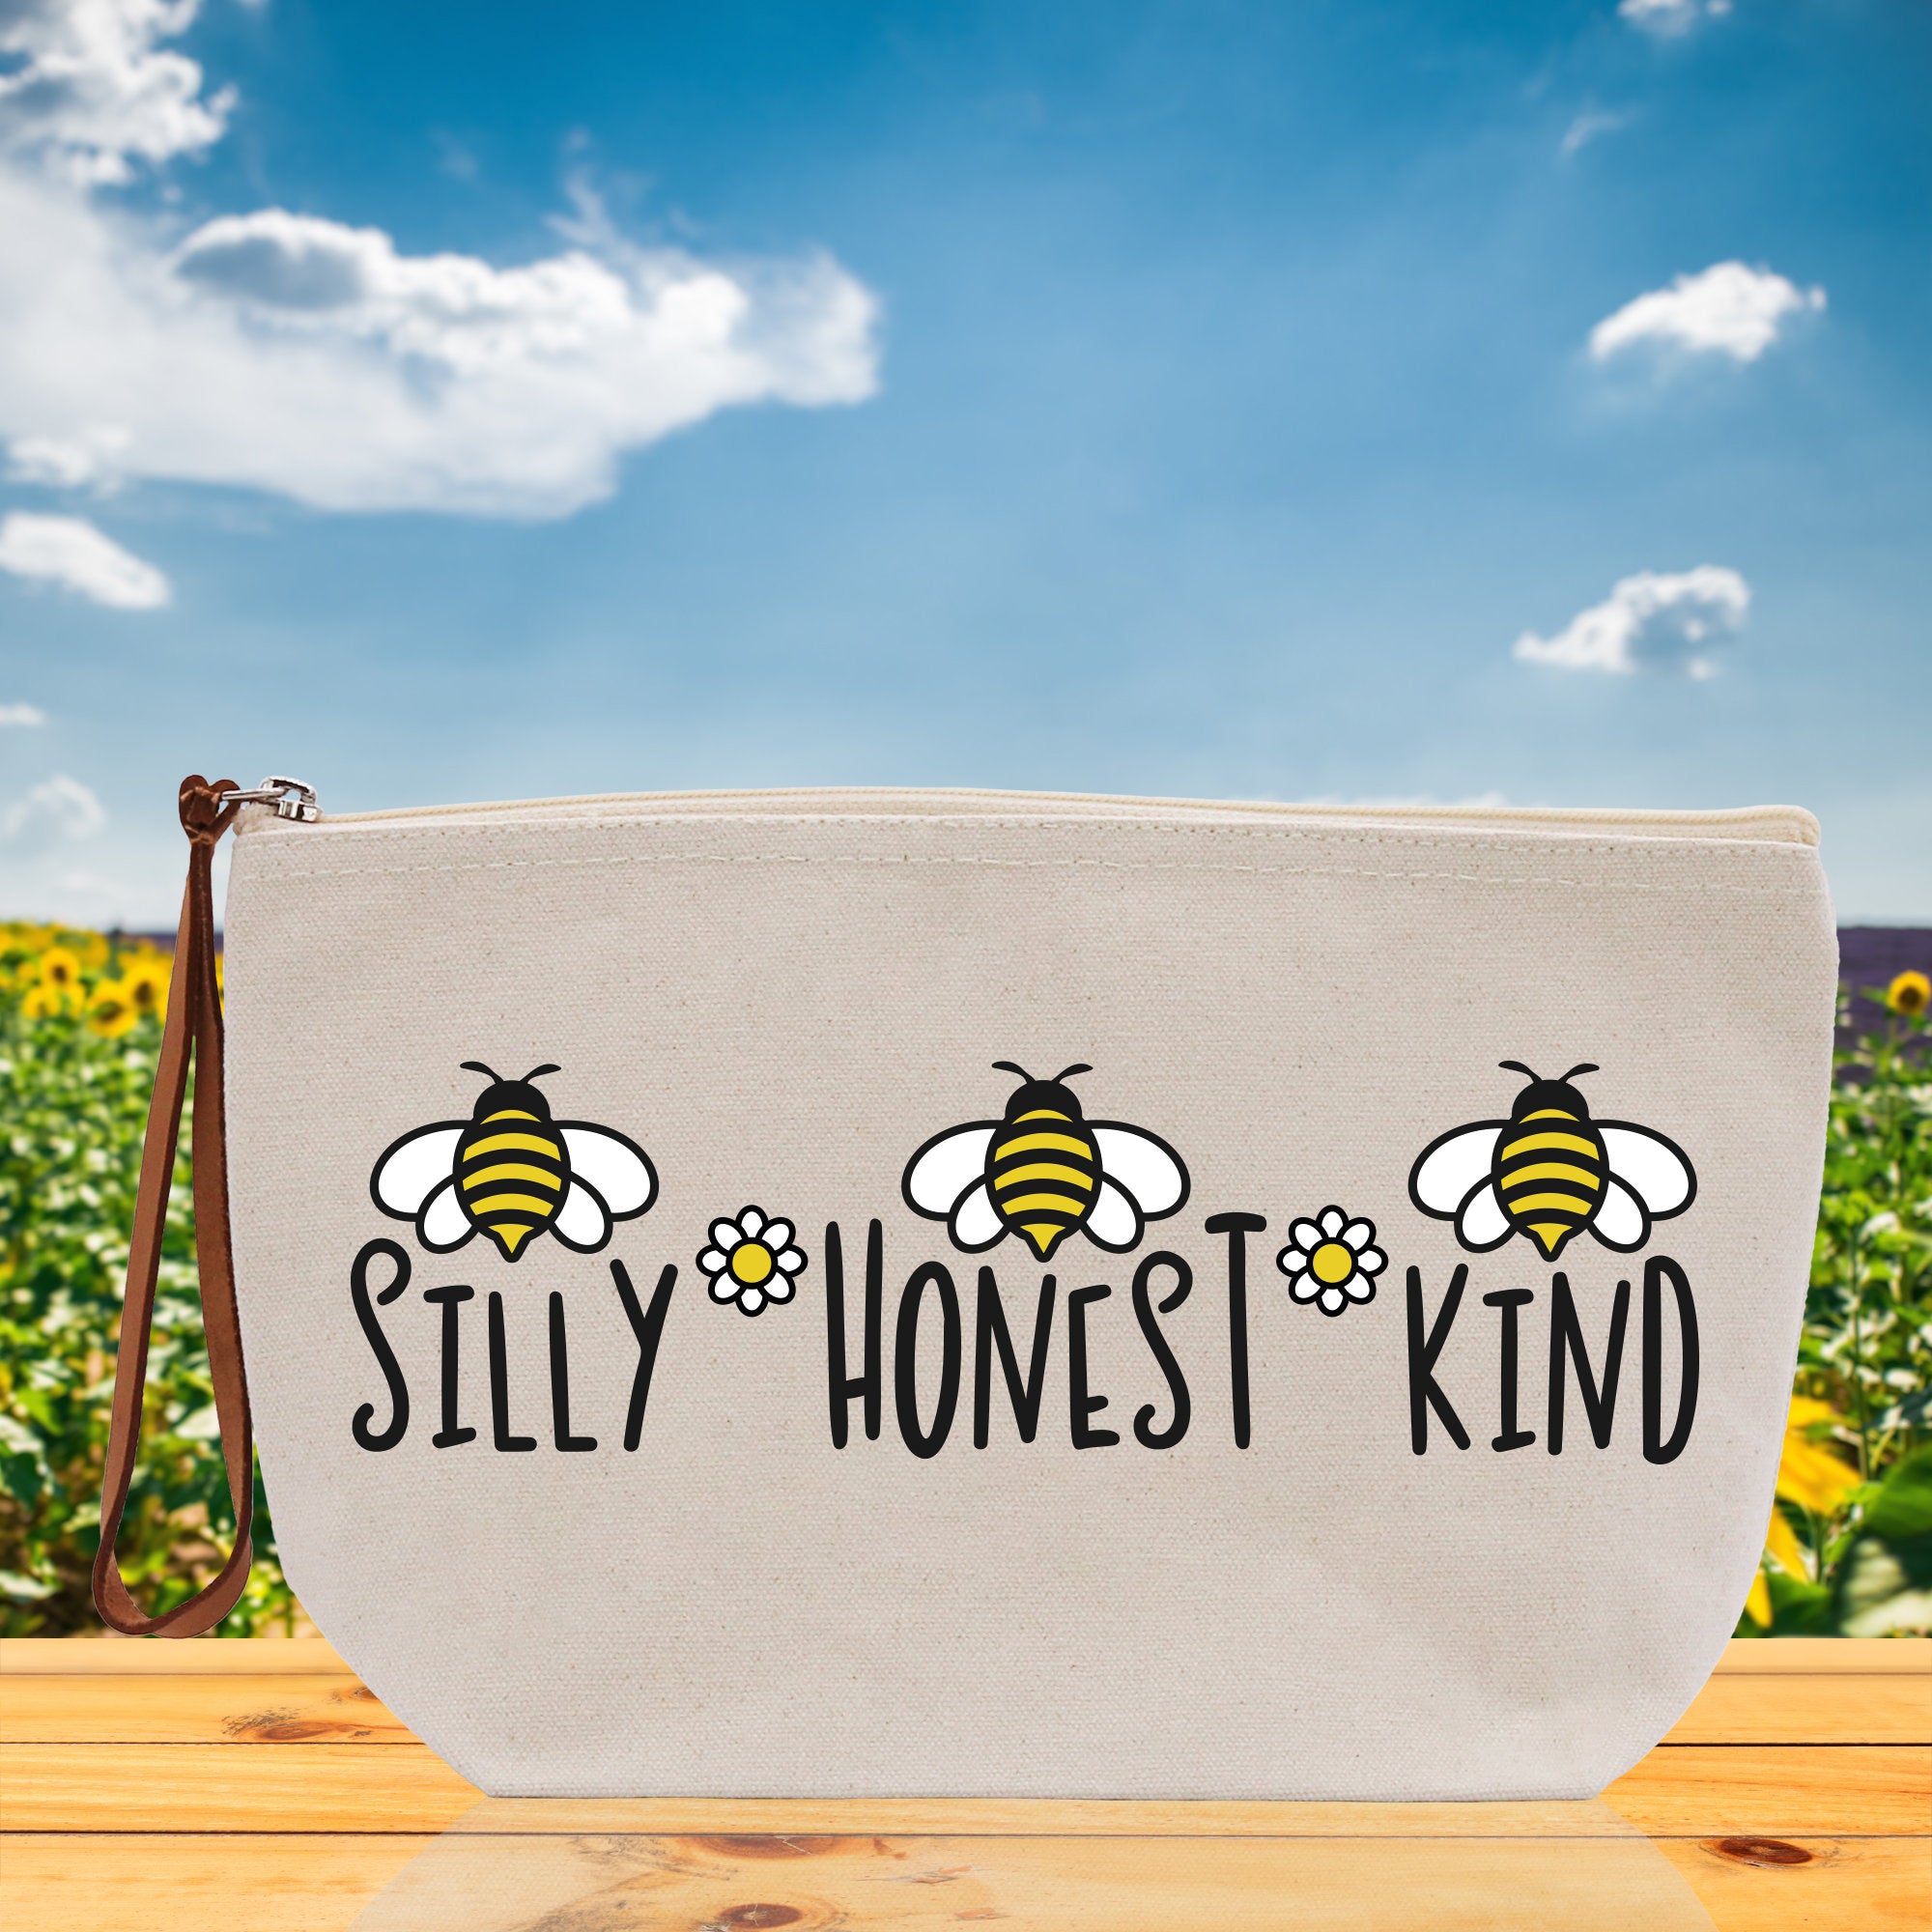 Silly Honest Kind Zipper Cotton Canvas Zipper Pouch Bag Bee Makeup Case Custom Zipper Pouch Tote Toiletry Bag Gift for Her Birthday Gift